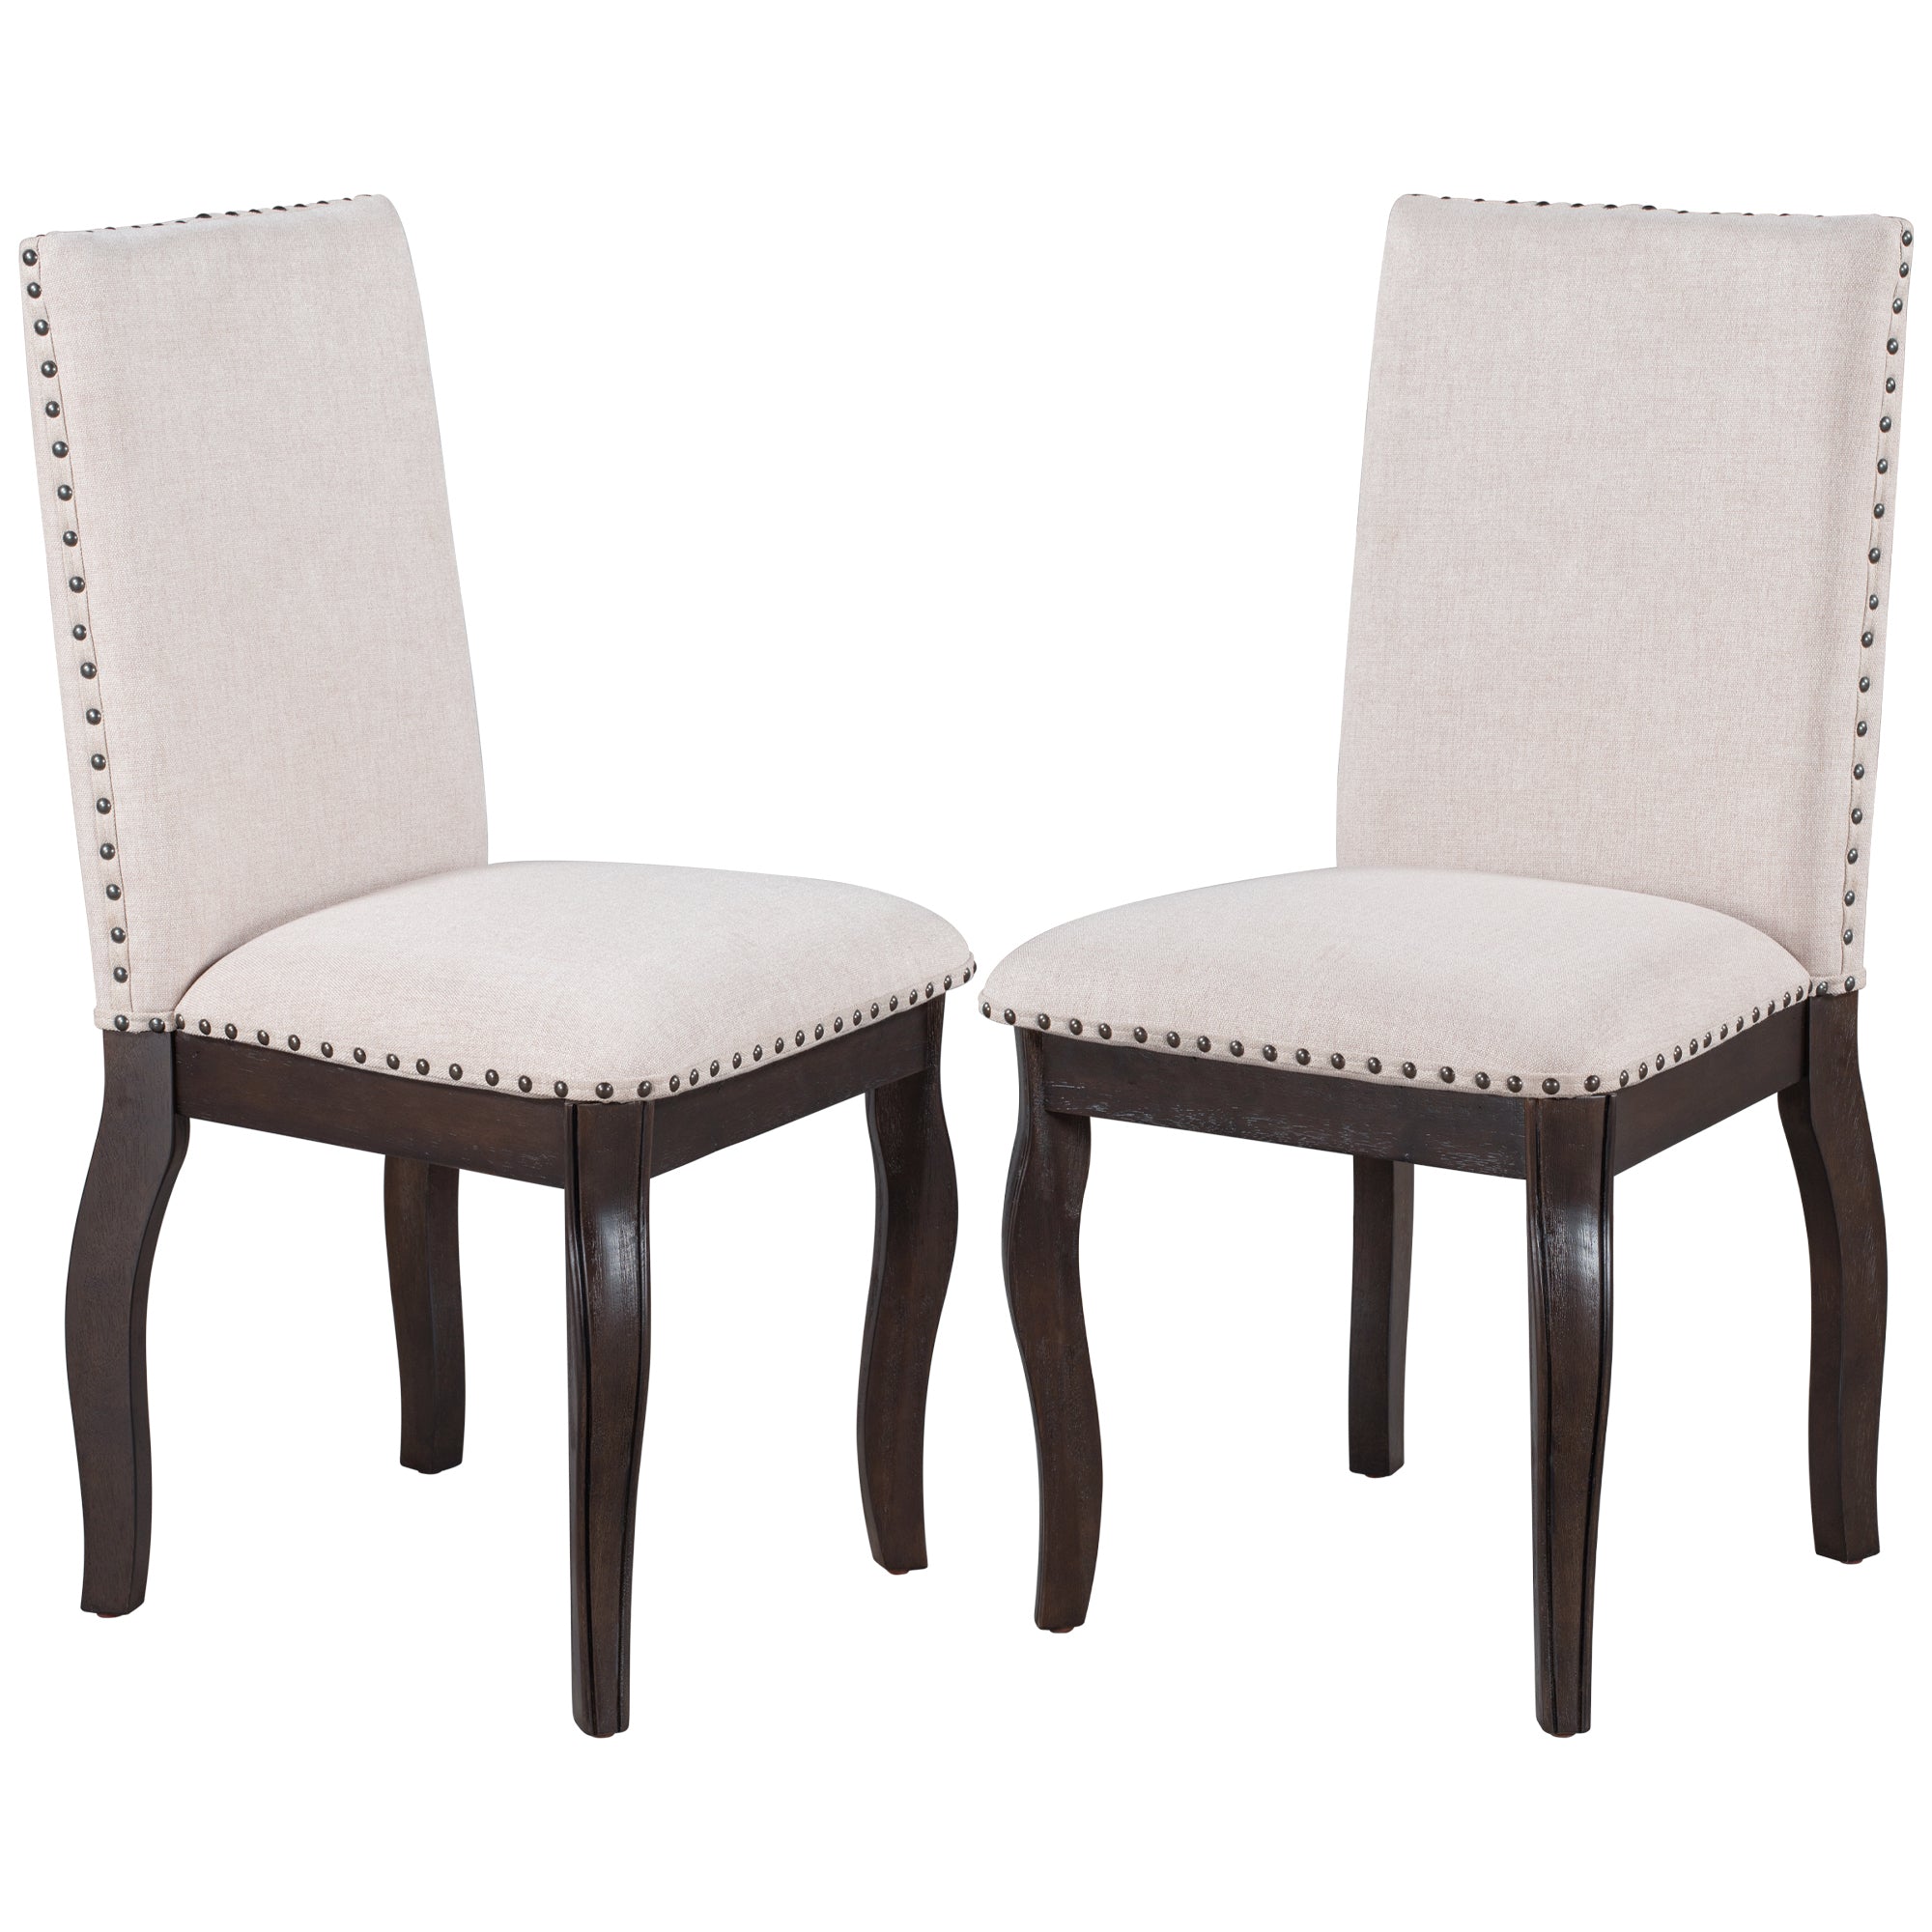 4-chair dining set